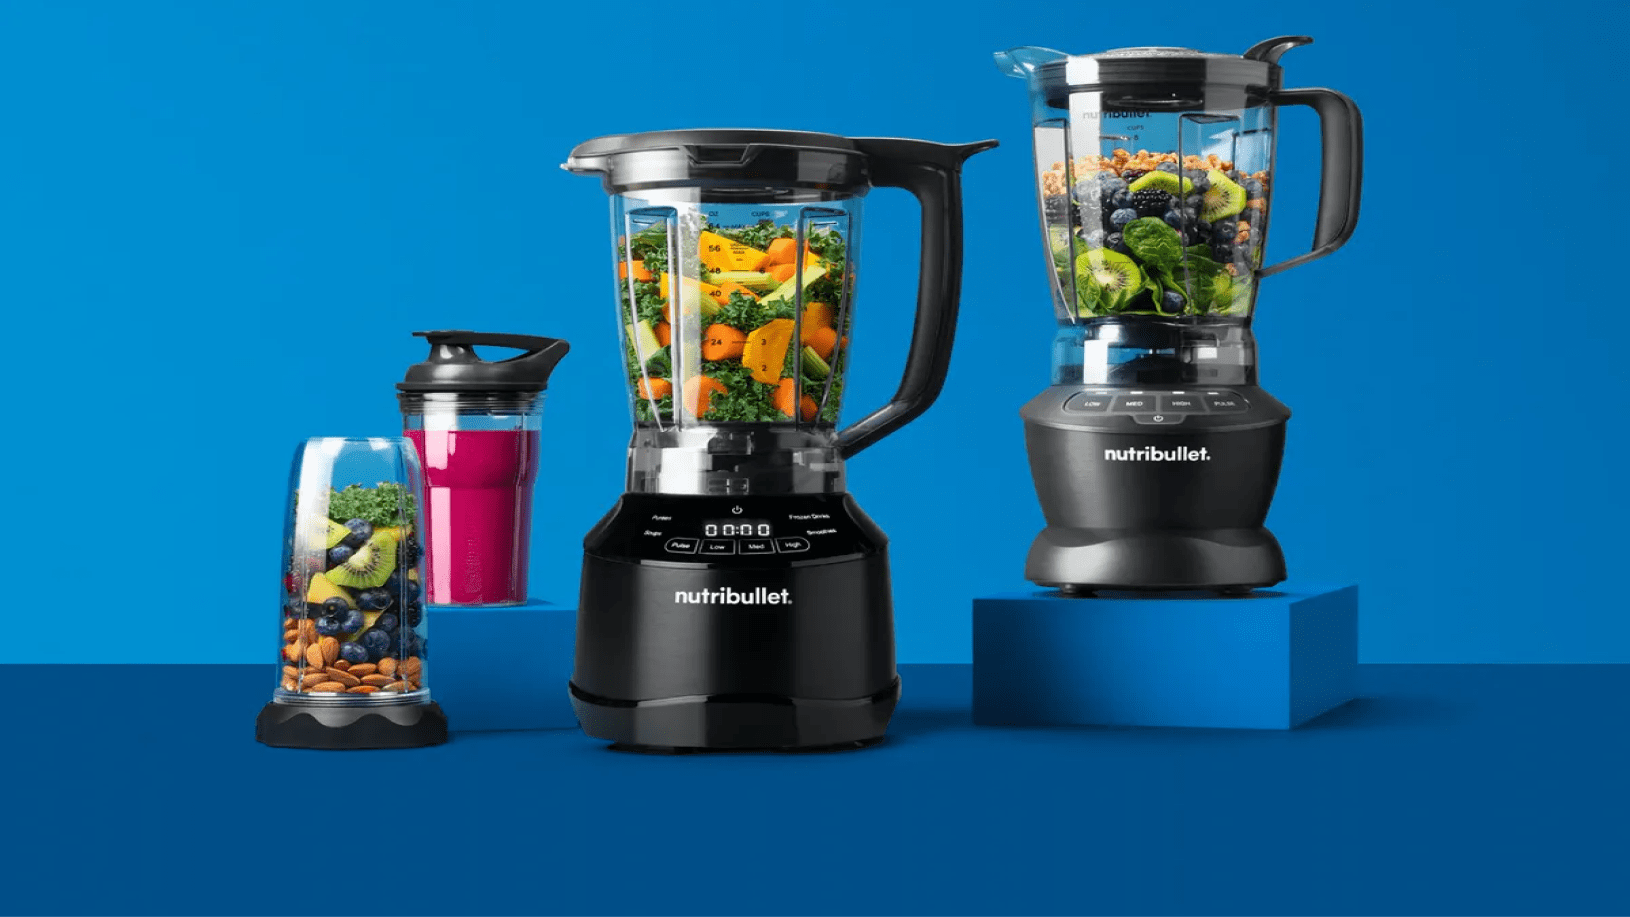 Nutribullet: Building Content Partnerships to Drive Top-of-Funnel Engagement